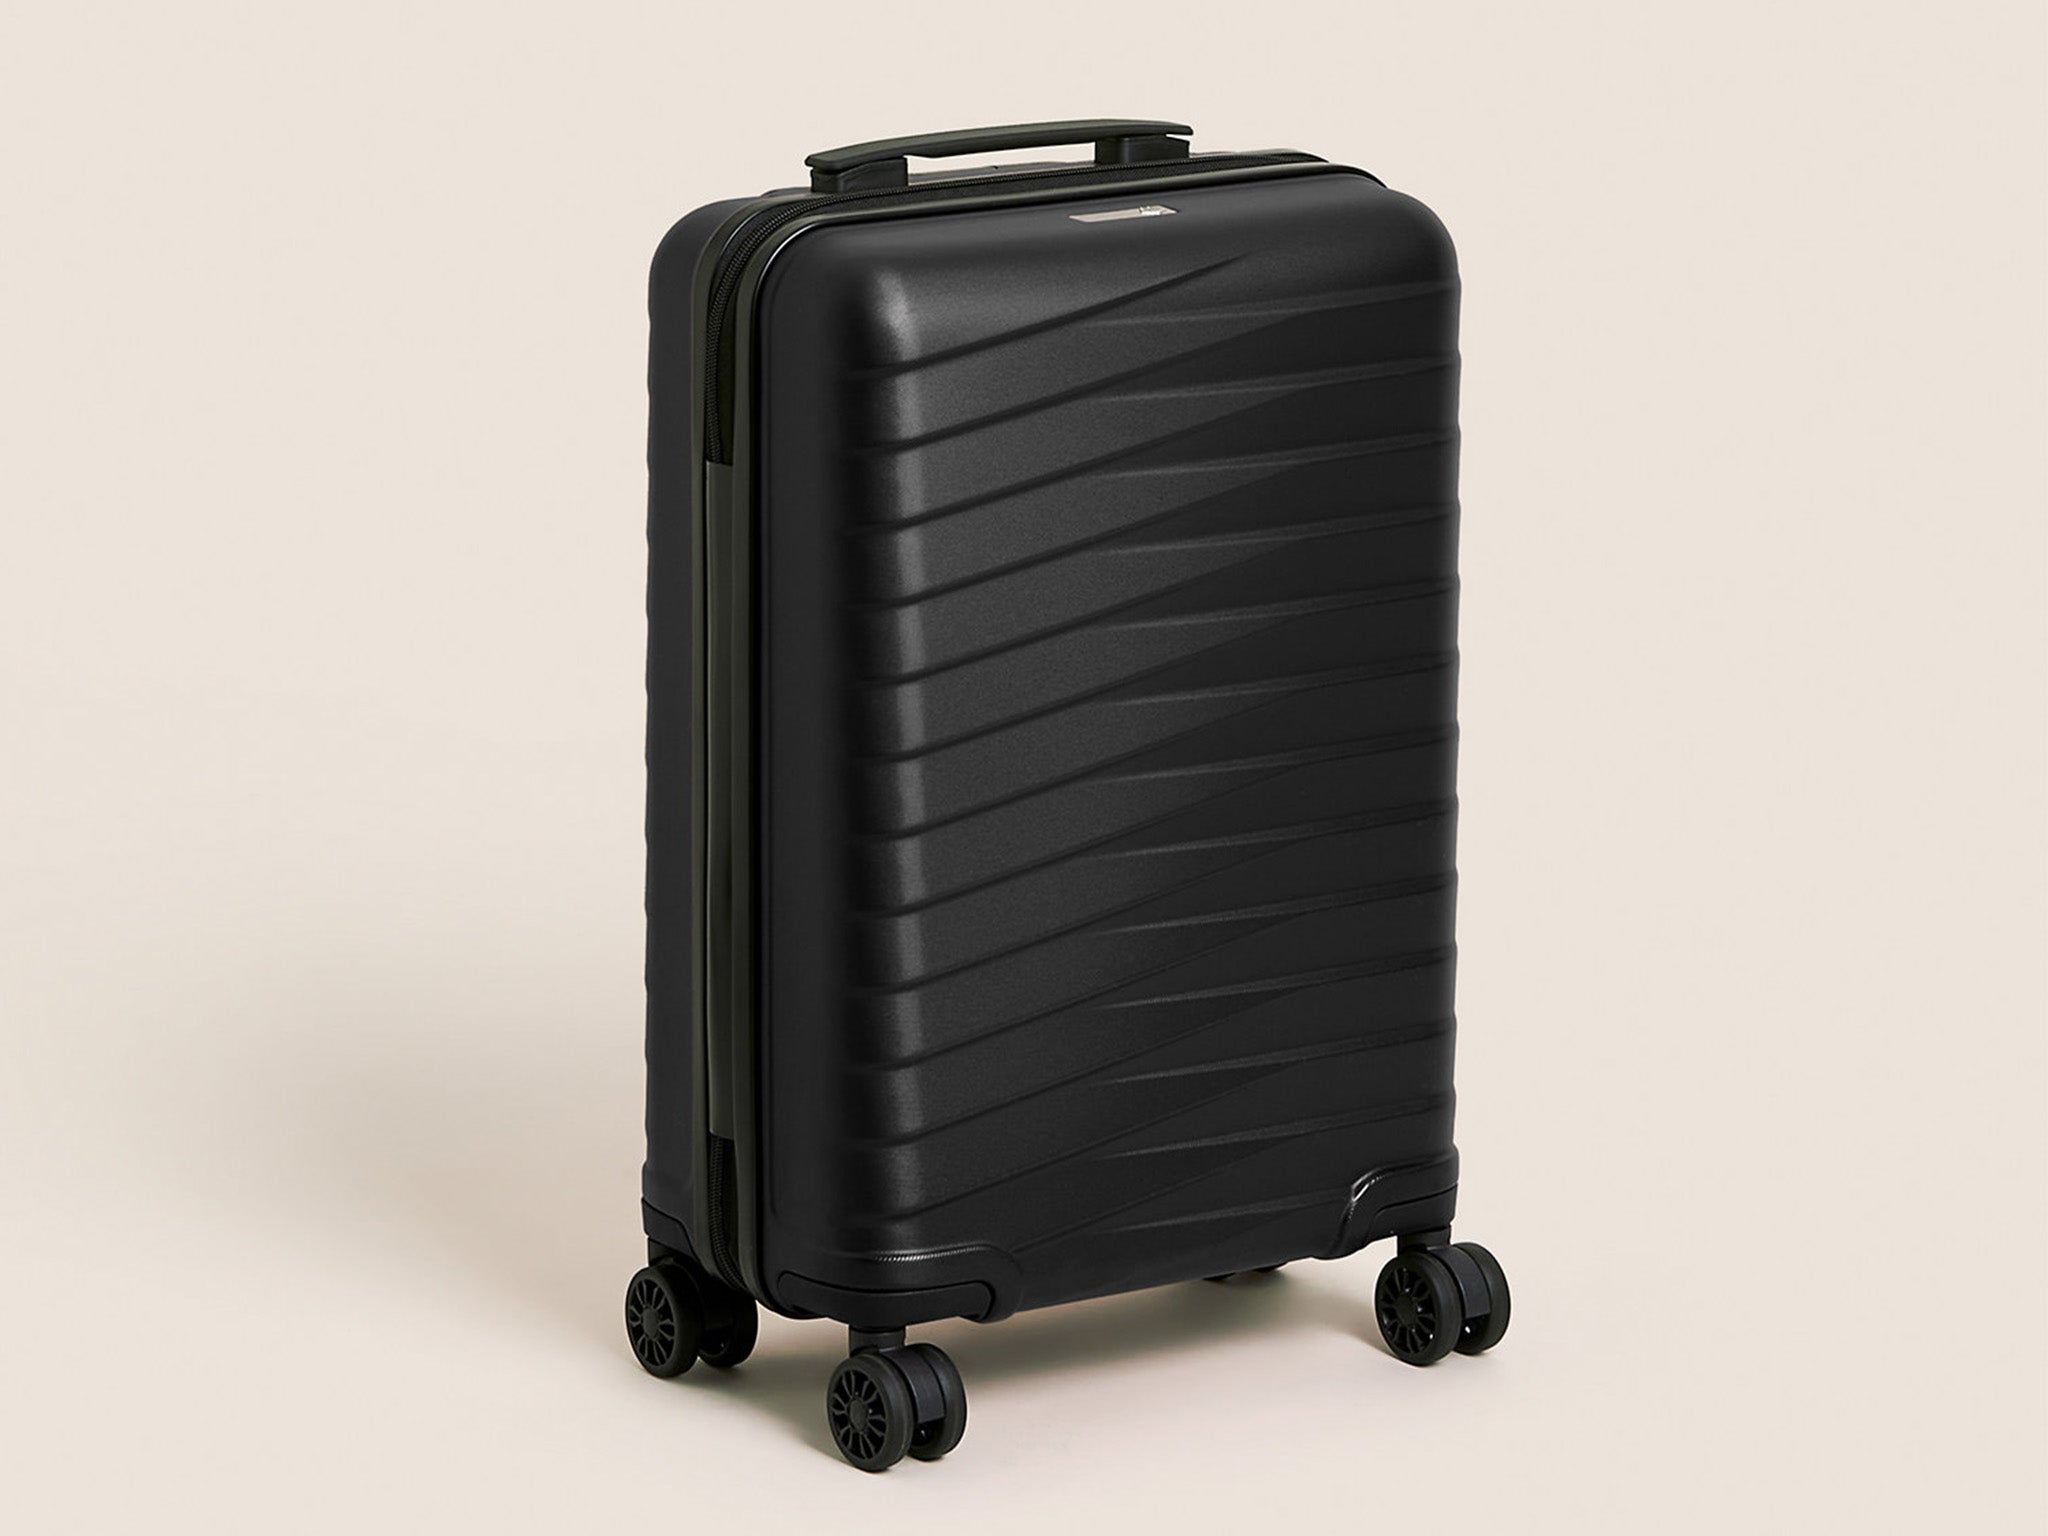 Marks and Spencer Oslo 4 wheel hard shell cabin suitcase